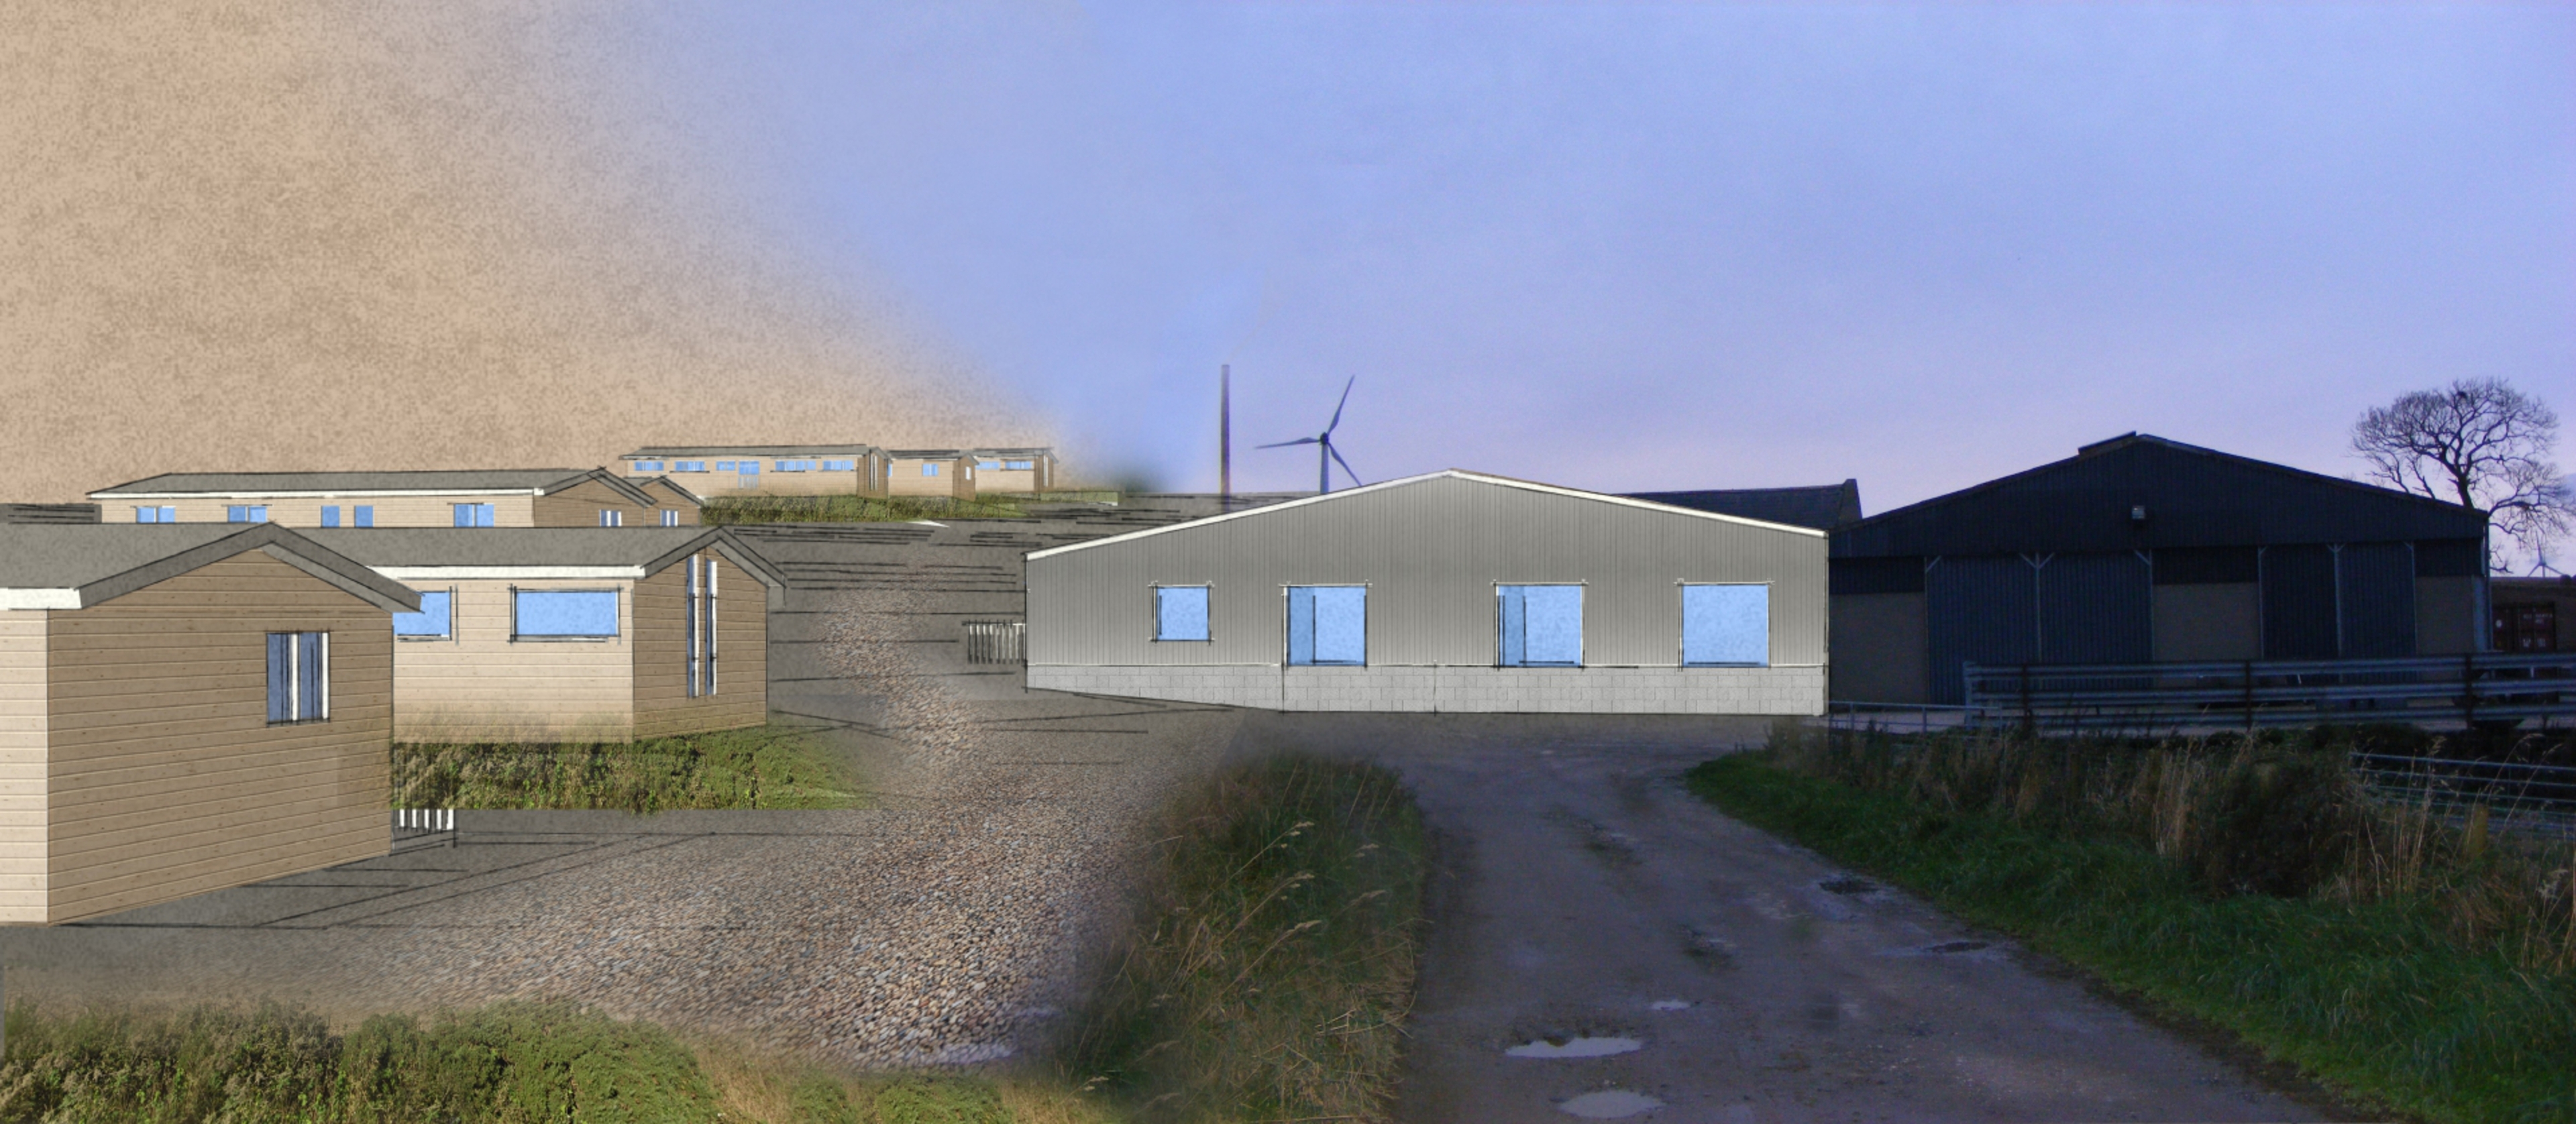 Artist impression of the rehab centre farm conversion

north east

SUBMITTED